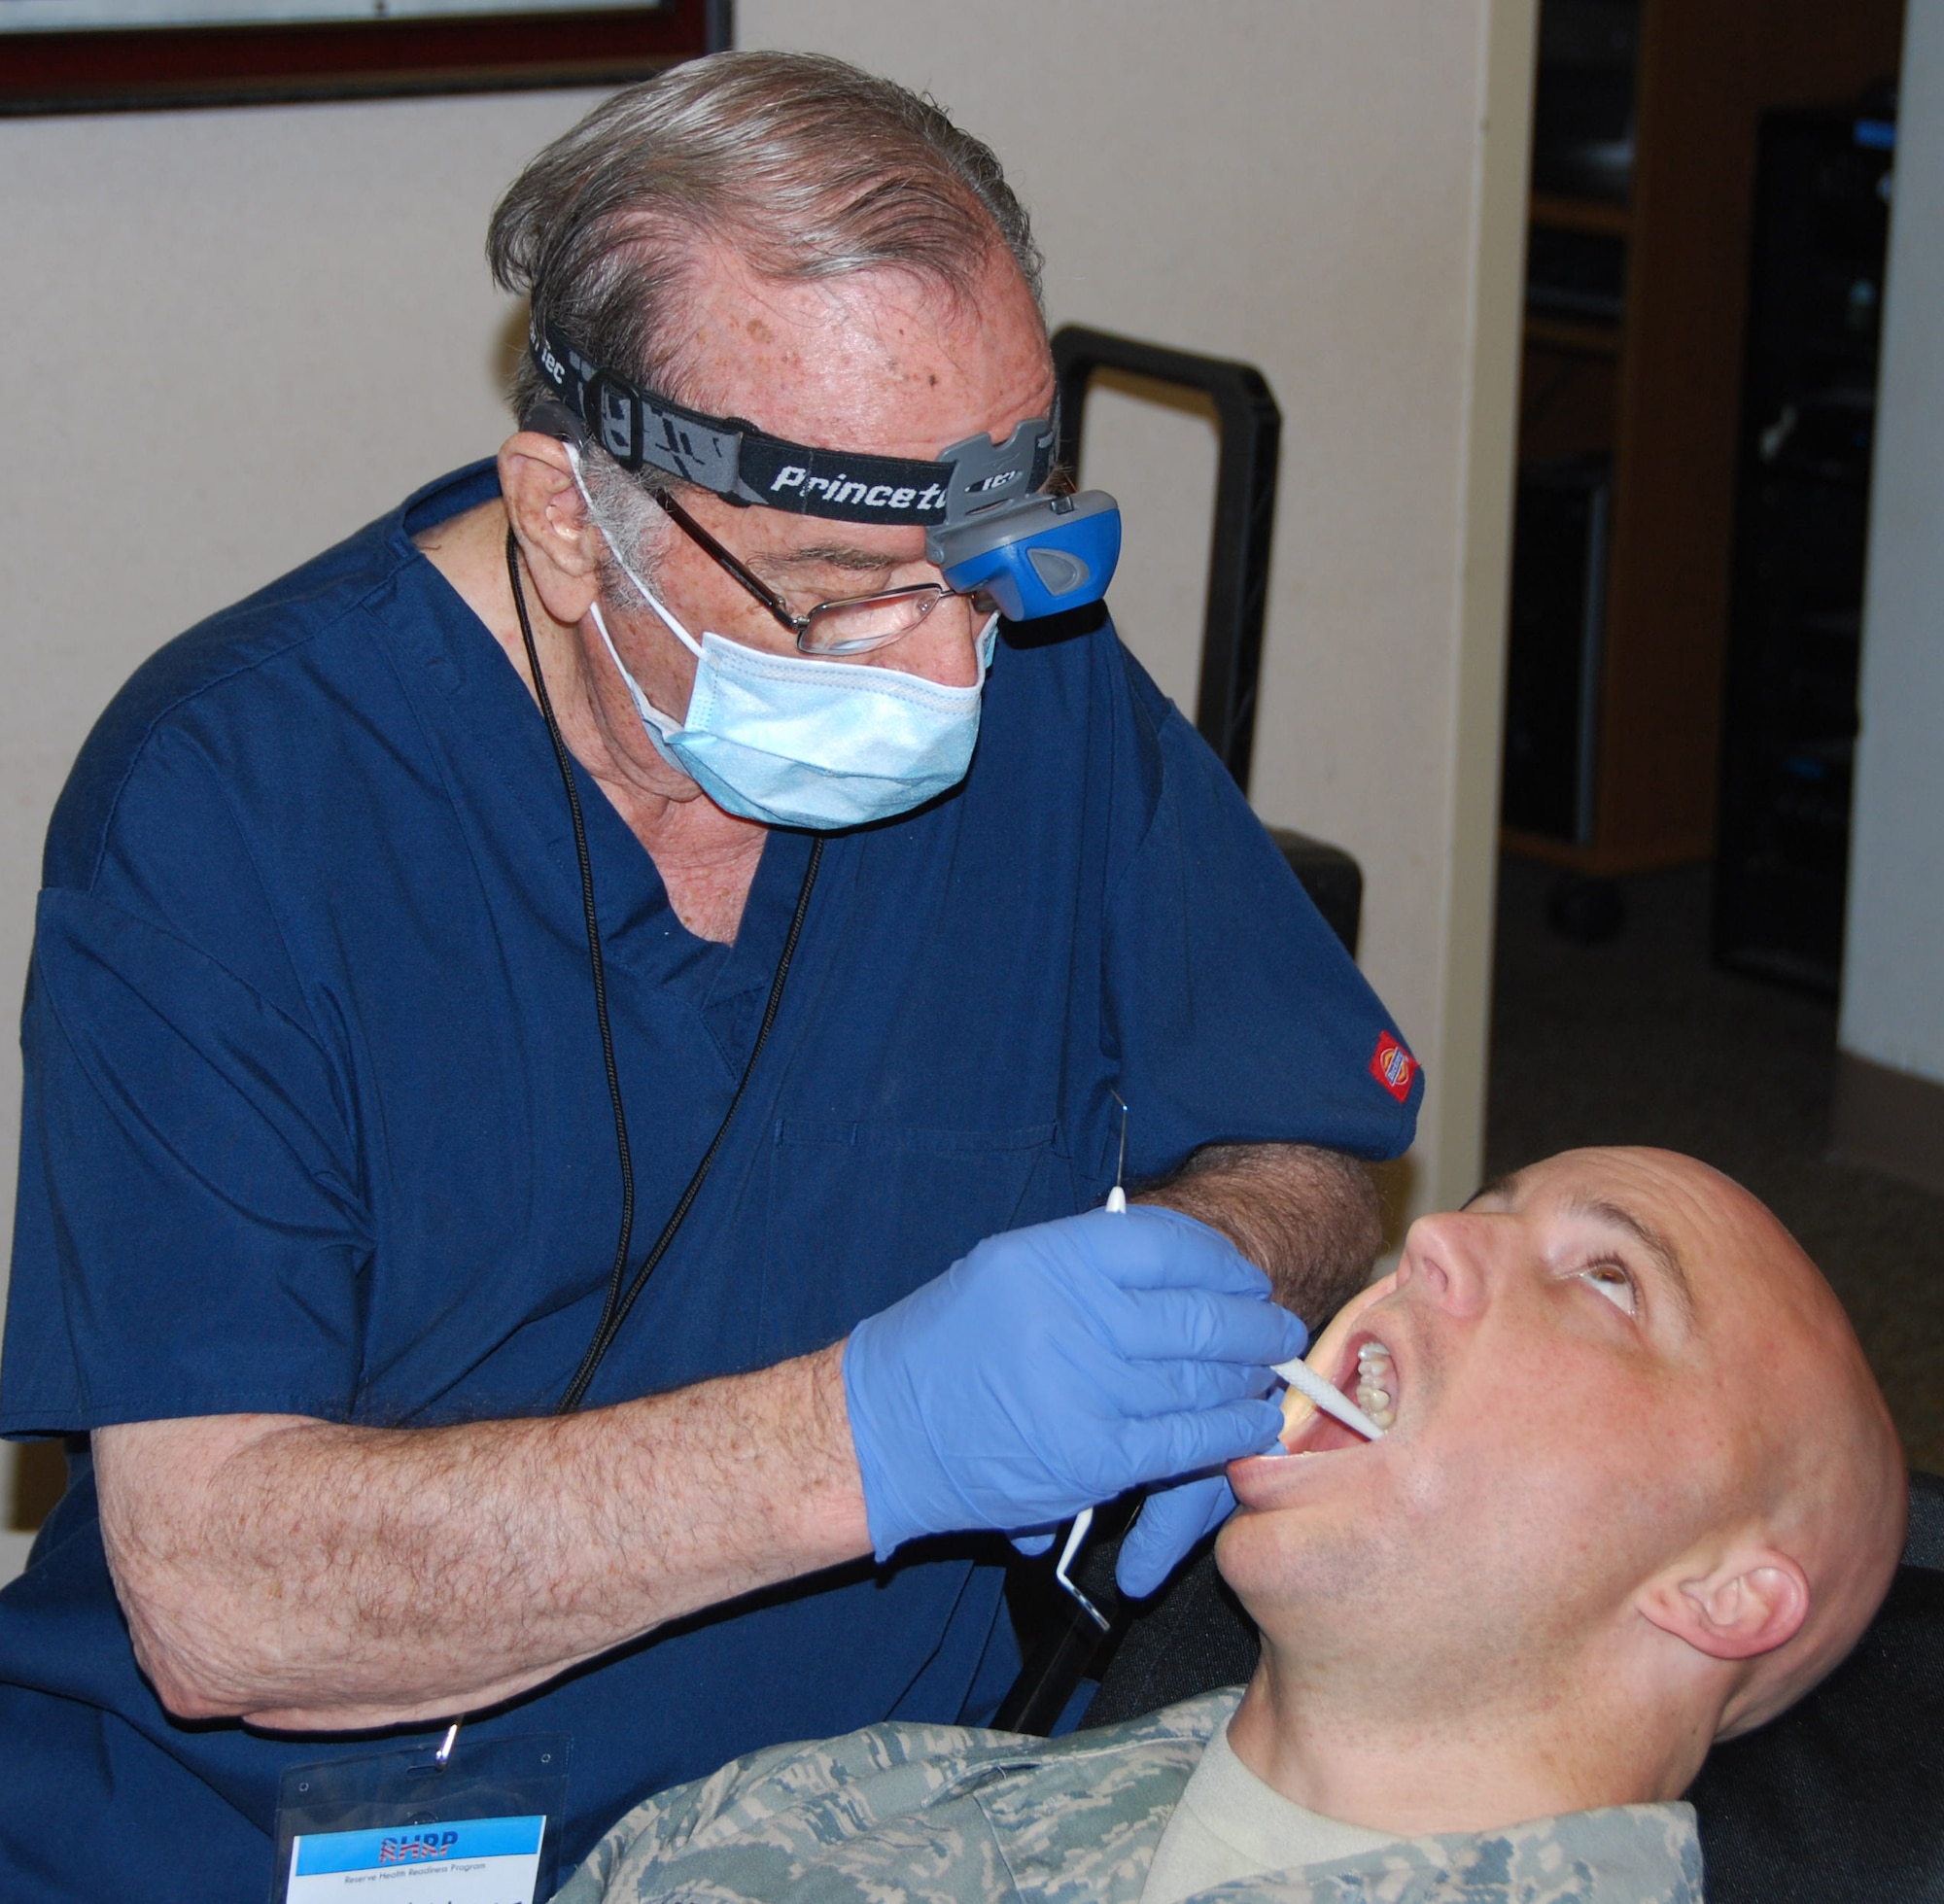 Dr. A.B. Holt, D.D.S., examines Staff Sgt. Corey Lambrecht’s teeth at a dental event at Tinker Air Force Base on April 2, 2011.  Lambrecht is from the 72nd Aerial Port Squadron.  (U.S. Air Force photo by Tech. Sgt. Zach Jacobs)